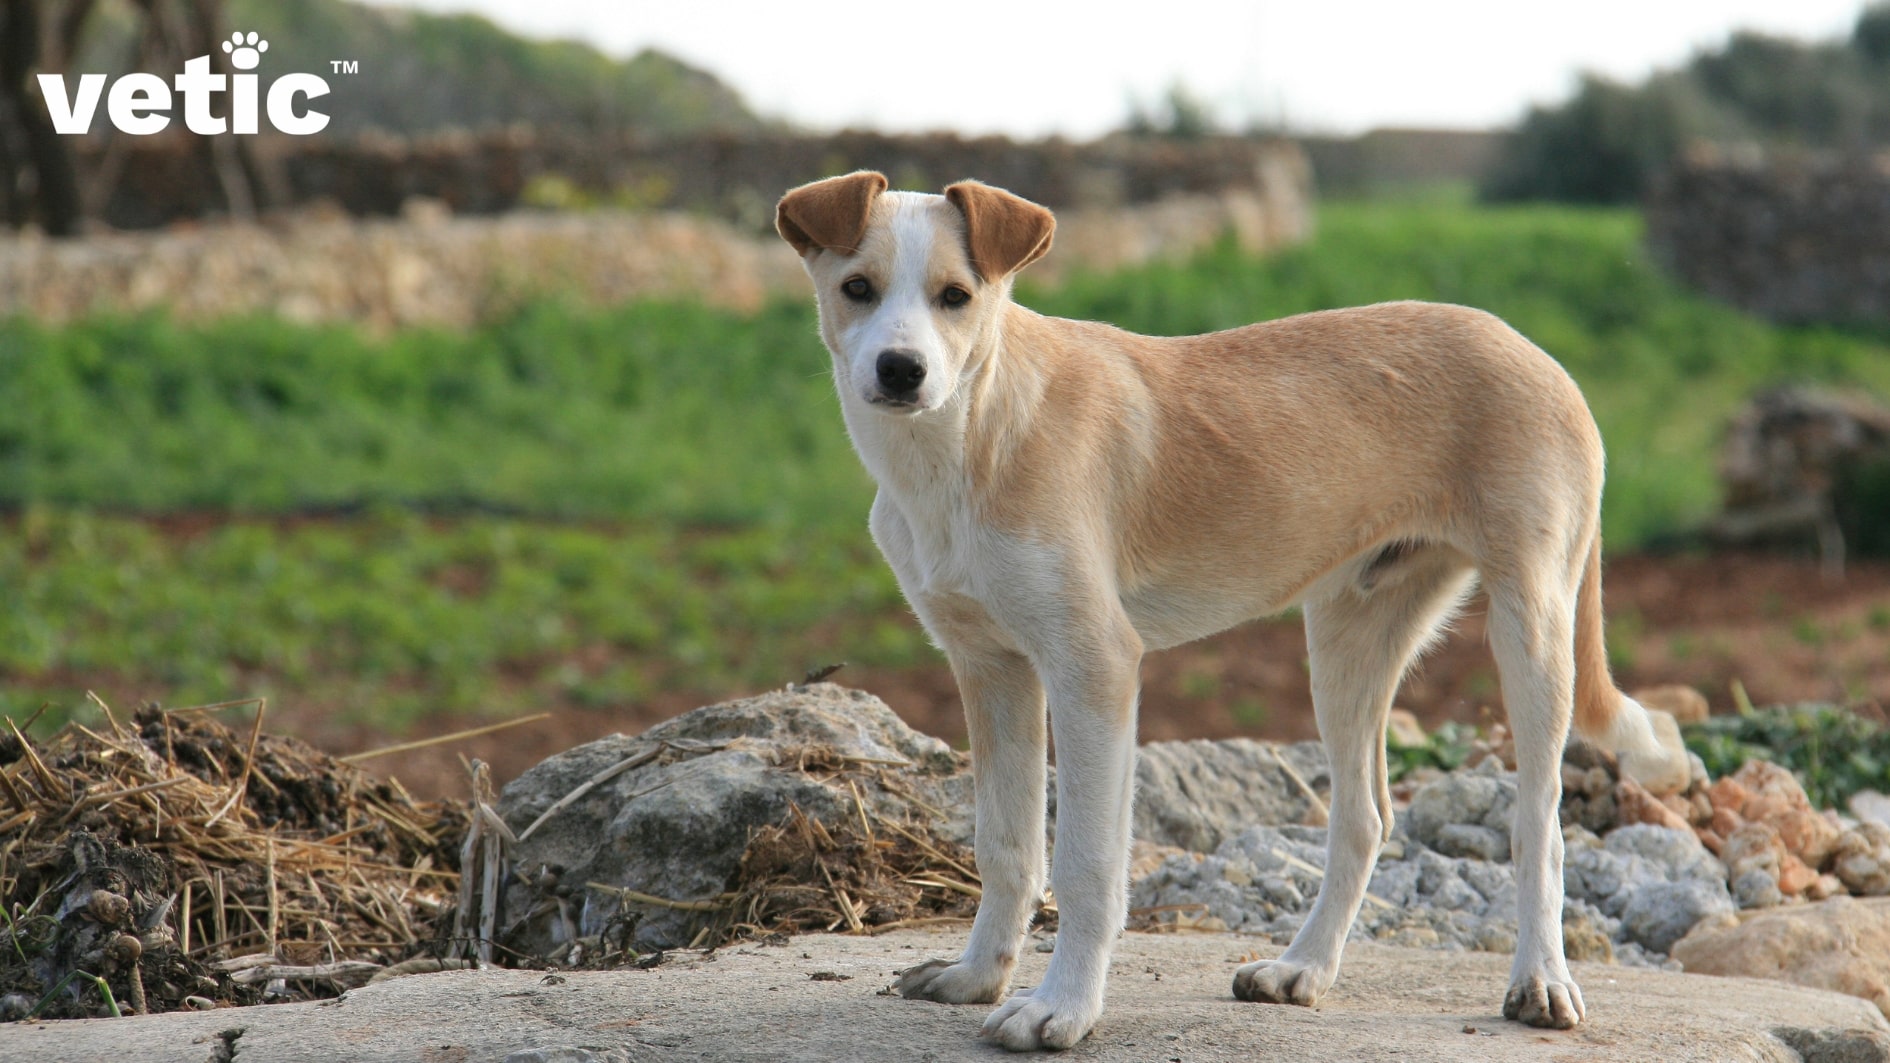 A cute light brown Indie dog pup with folded ears and white patches looking directly at the camera. the pup is standing on a rugged rocky surface with some greenery visible in the background.